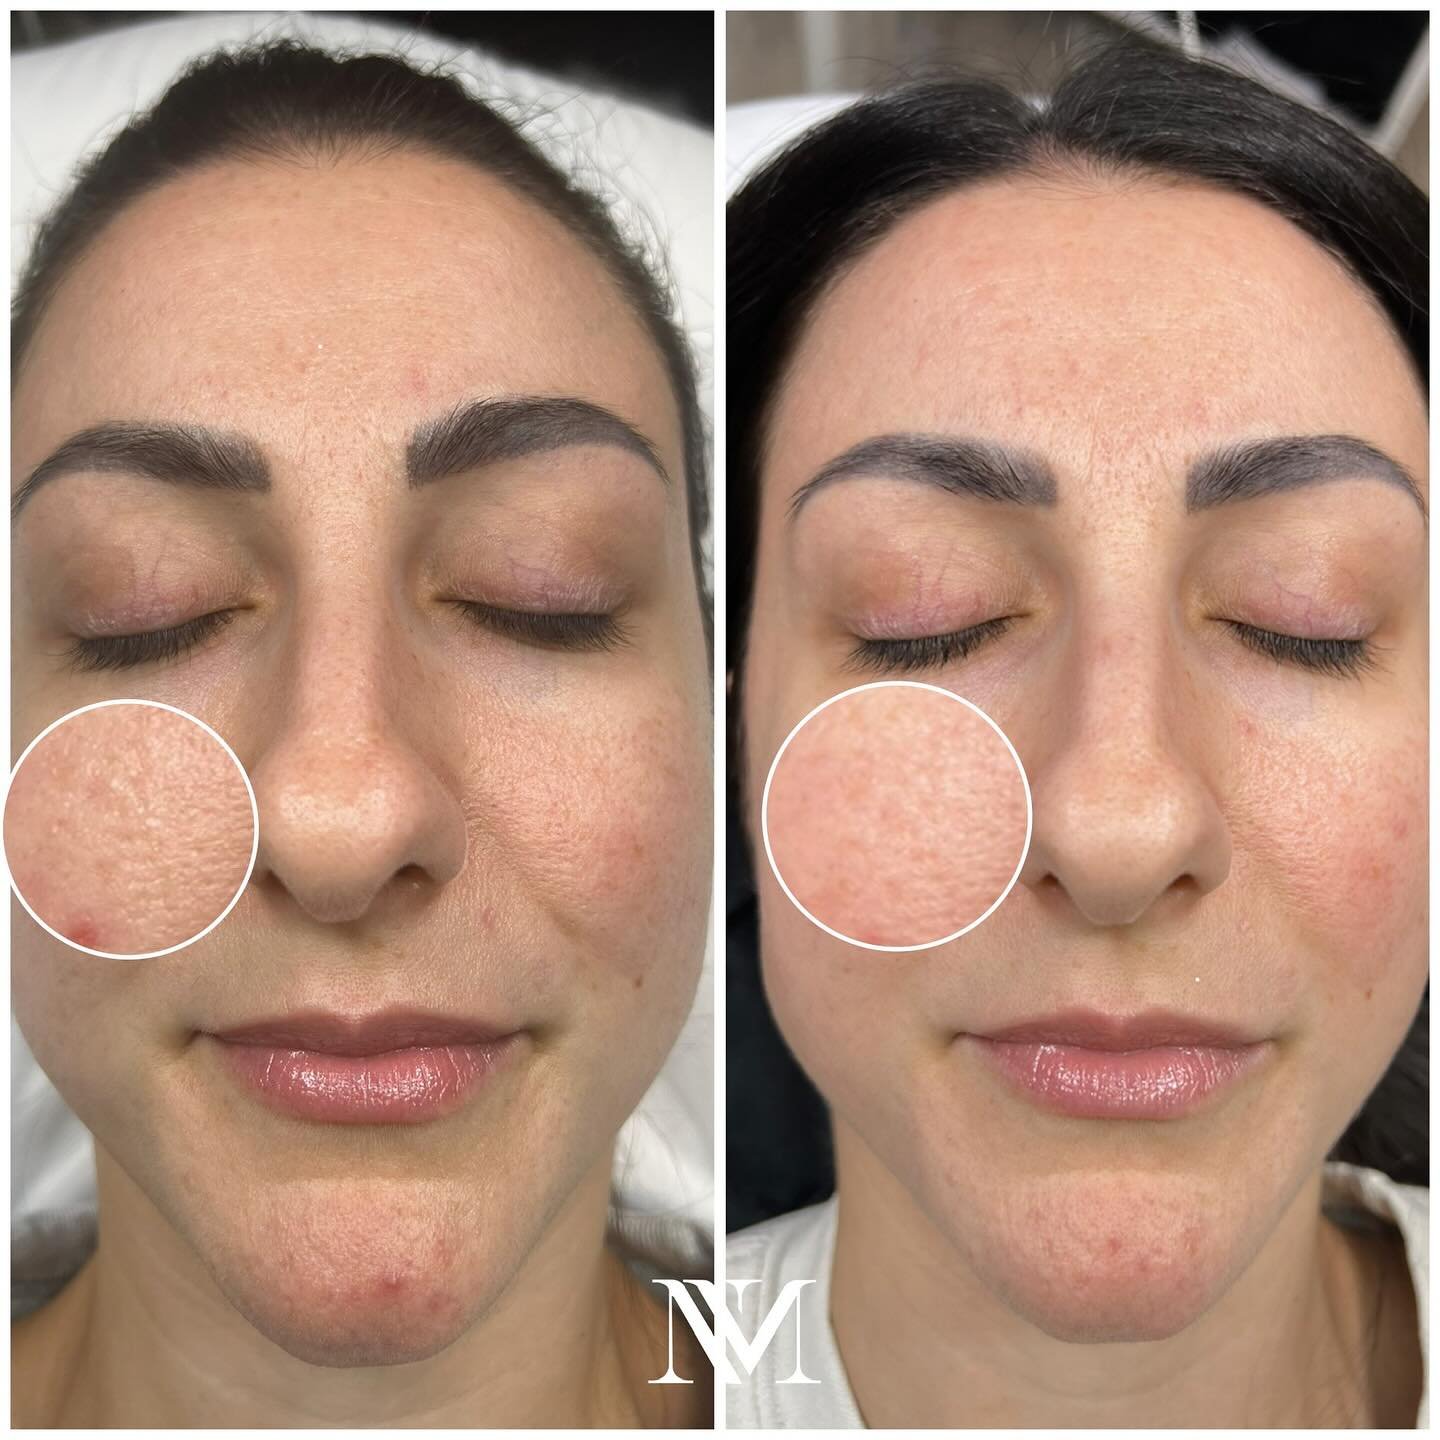 I don&rsquo;t promise miracles&hellip;Instead I deliver results! #yourmedicalaesthetician 

Look at these amazing progress photos achieved with using ONLY skincare in the comfort of her own home! #zoskinhealth 

✨Power of MEDICAL GRADE SKINCARE✨ 
My 